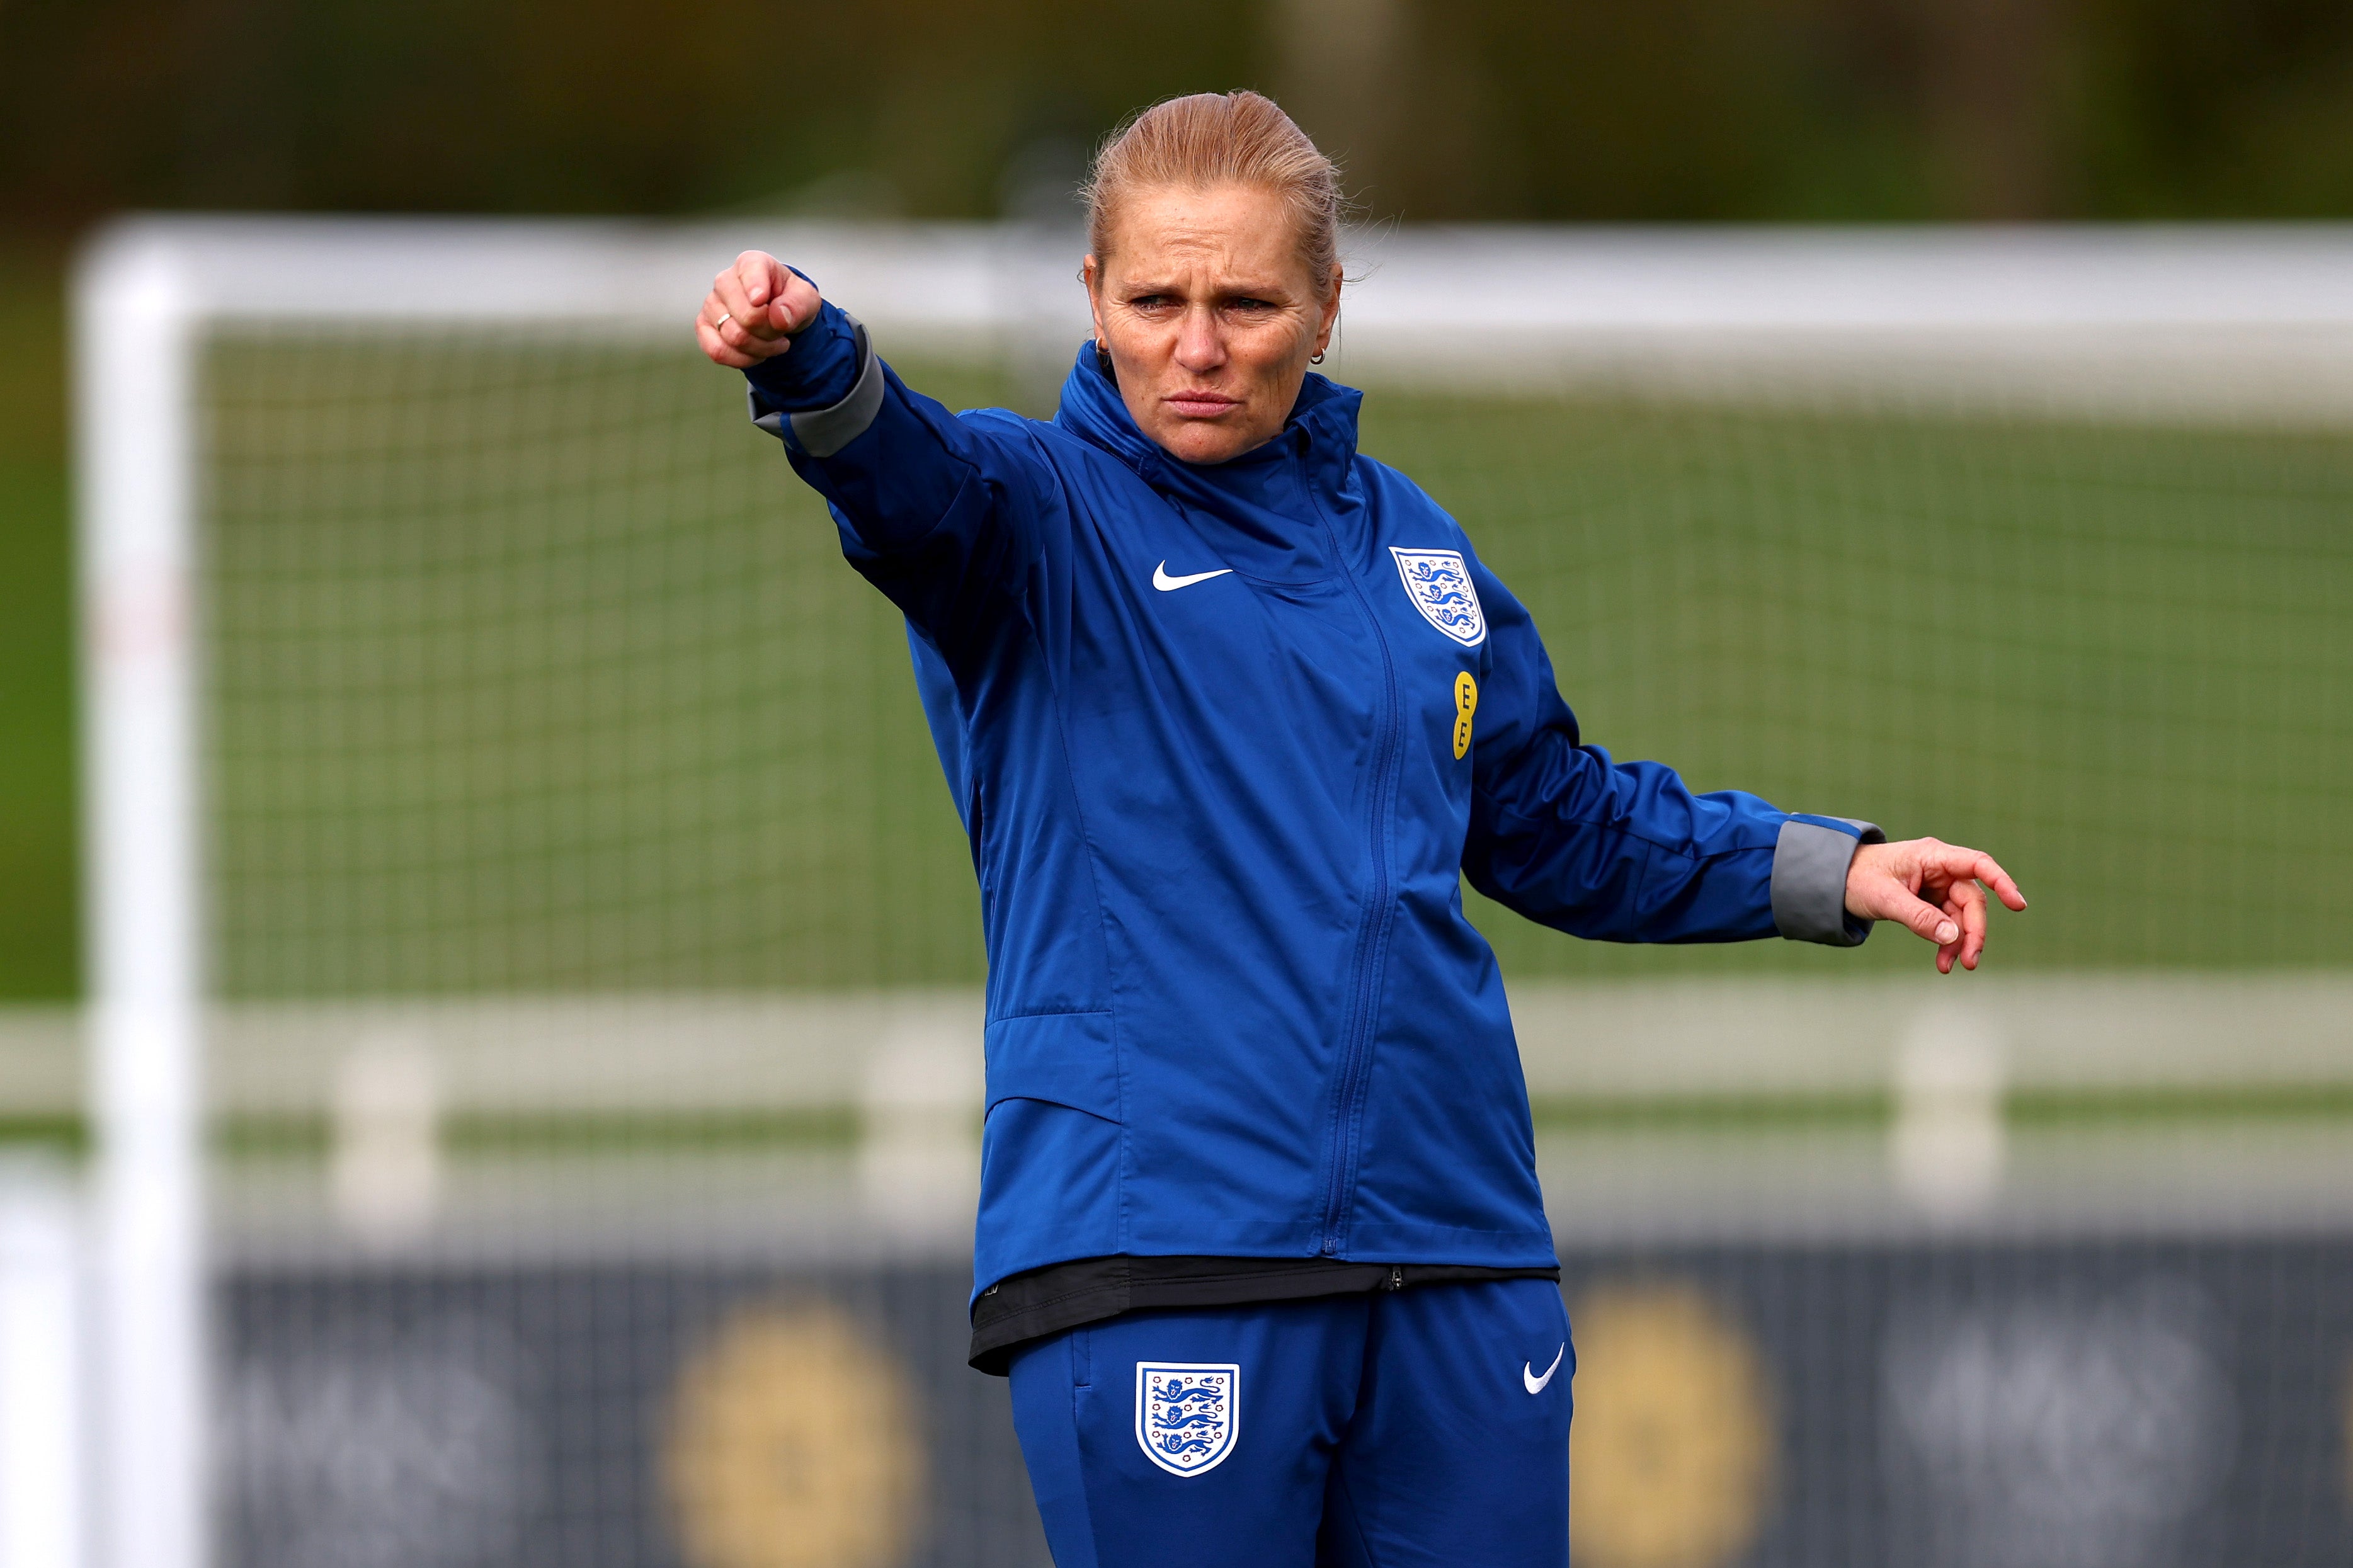 Sarina Wiegman guided the Lionesses to Euro 2022 triumph